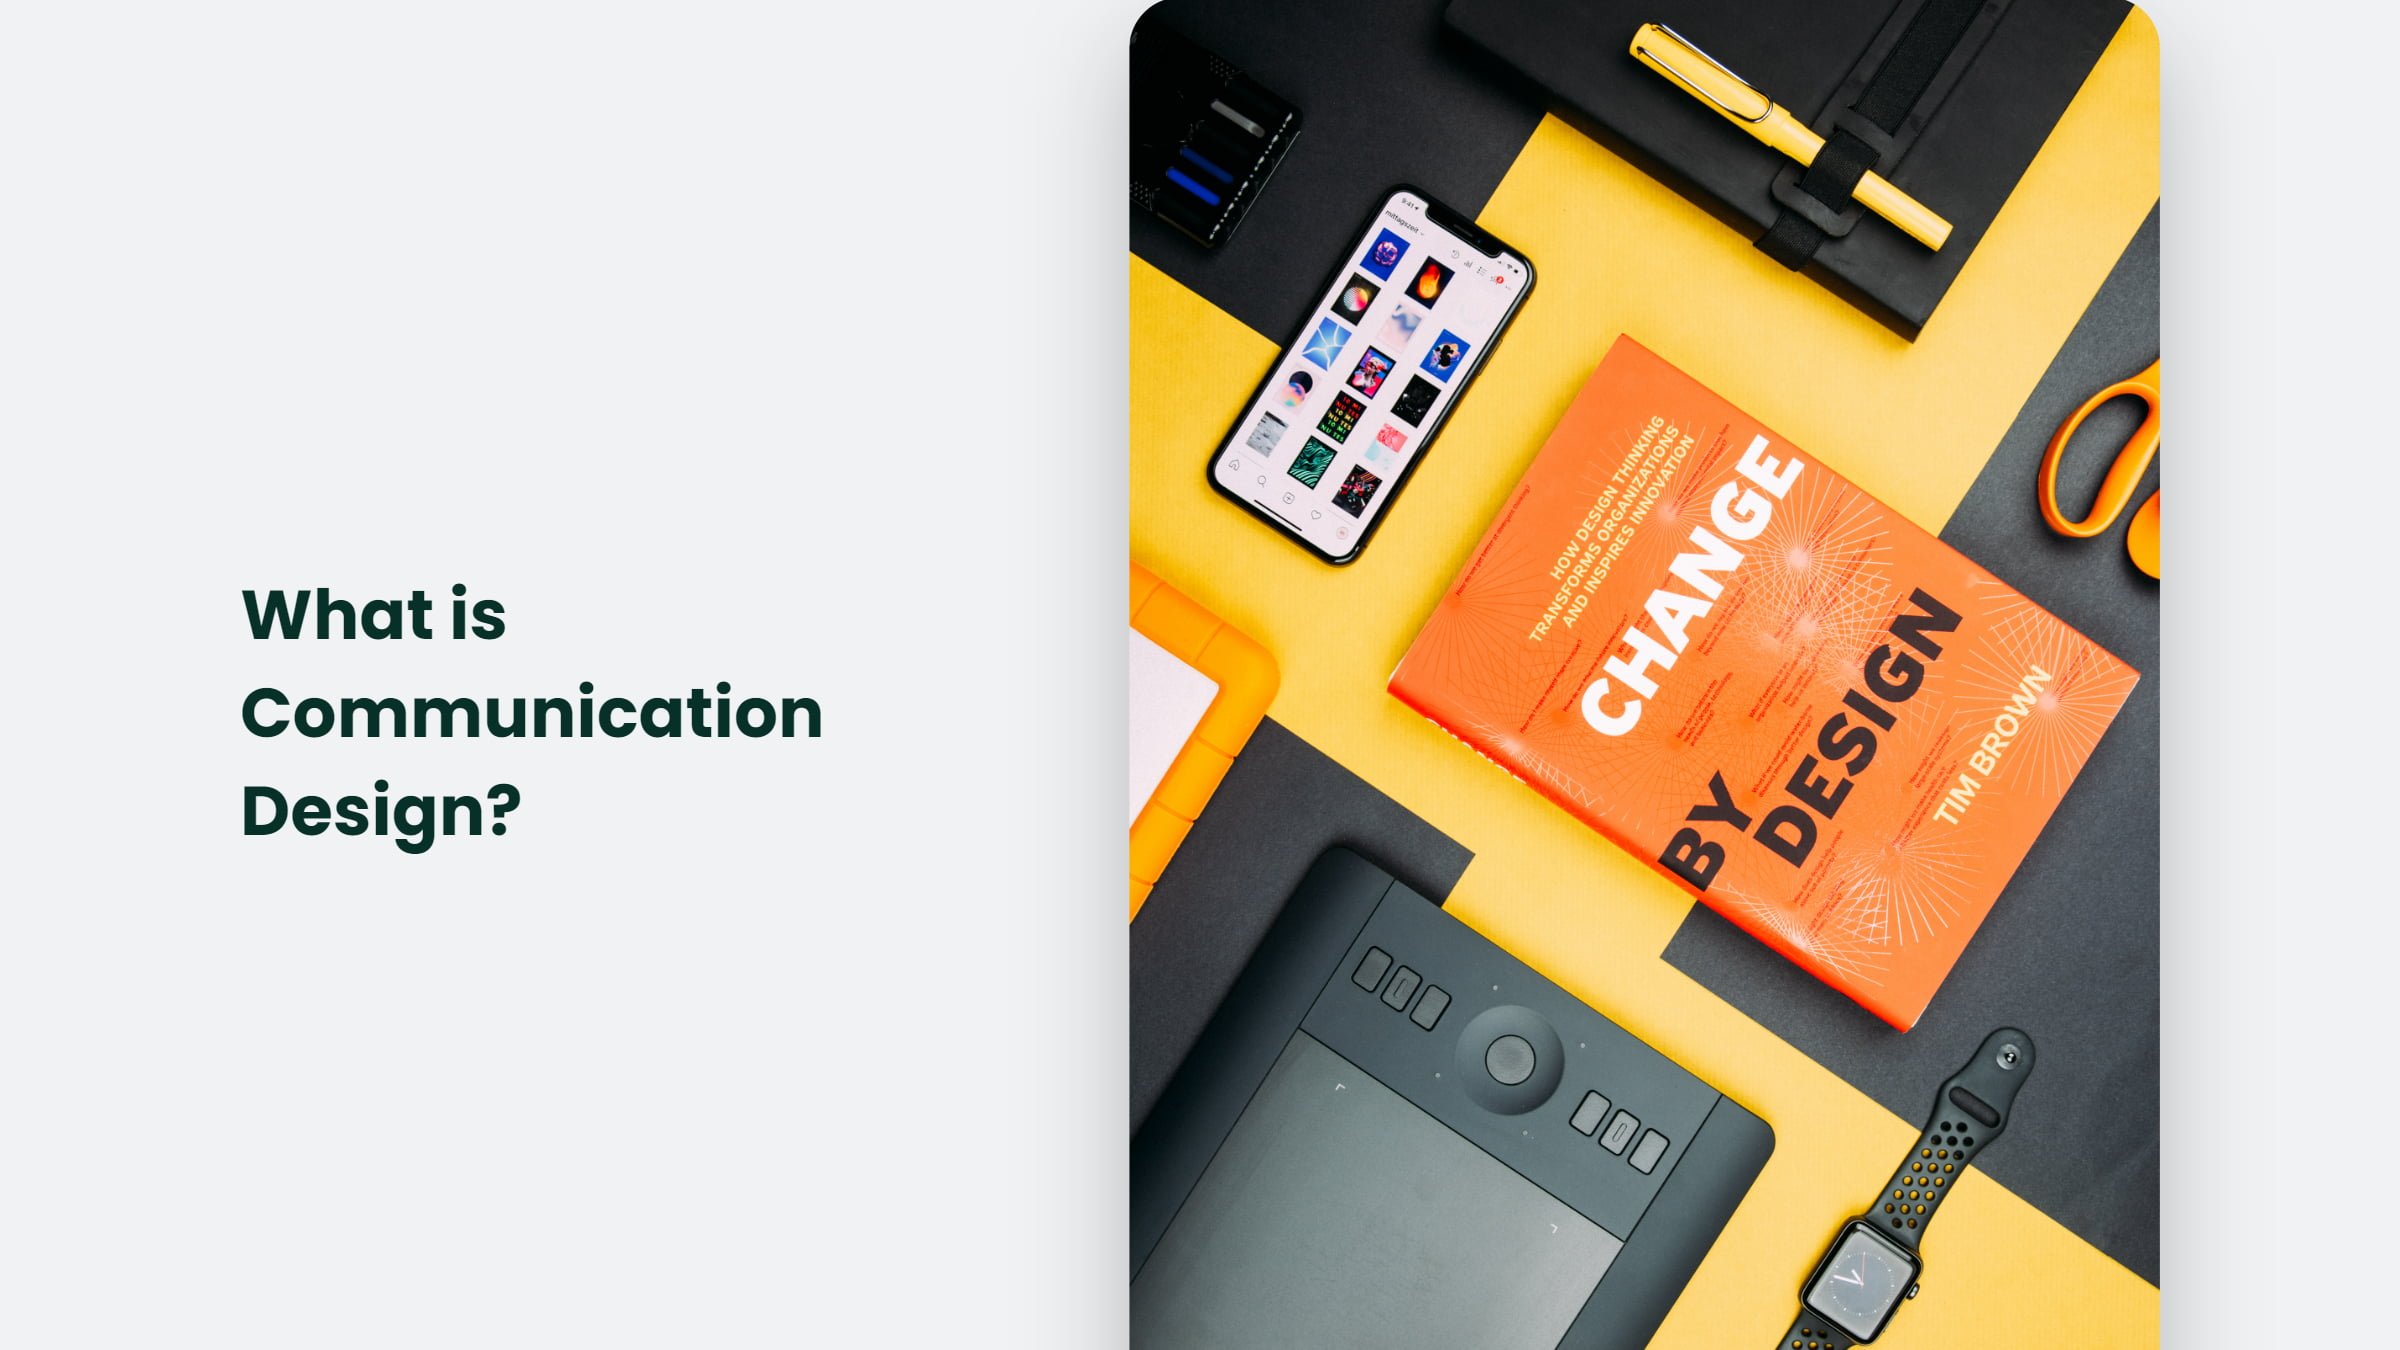 What Is Communication Design?